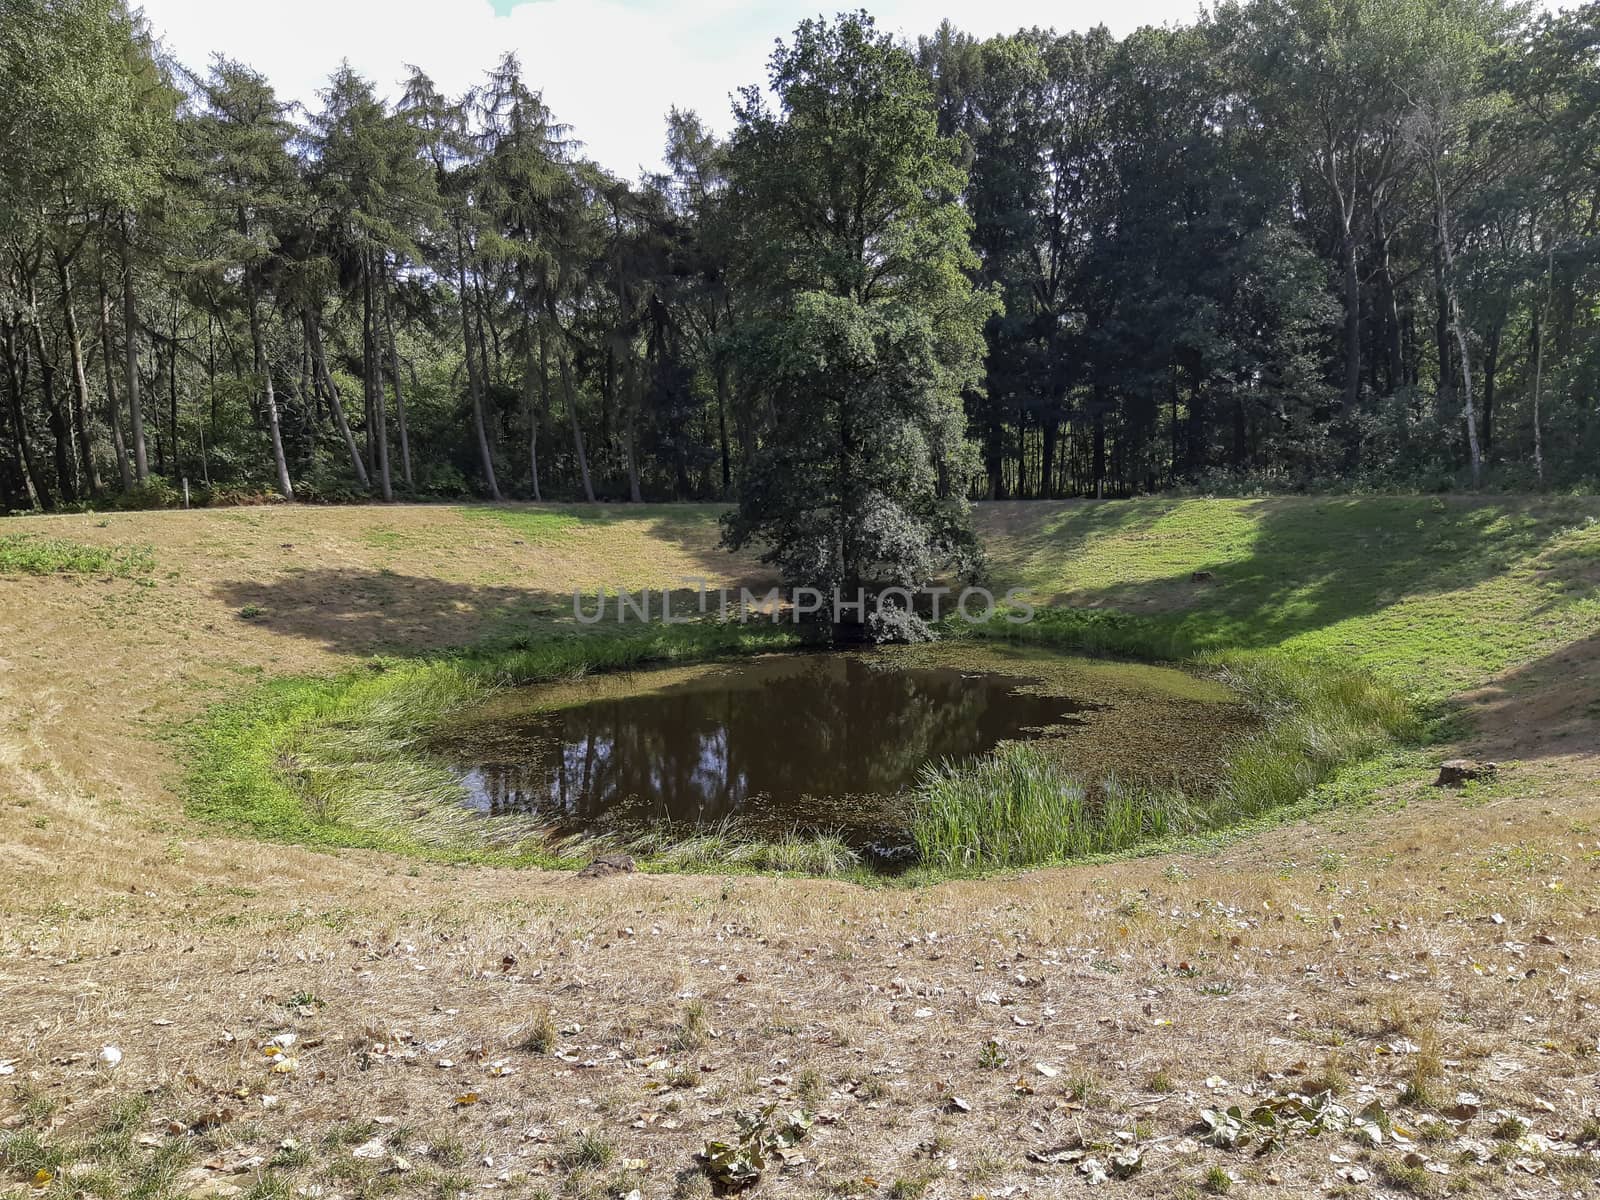 Caterpillar mine crater in Zillebeke, Ypres. formed by the detonation of a massive mine by the Allies that had been laid directly under the German trenches in June 1917